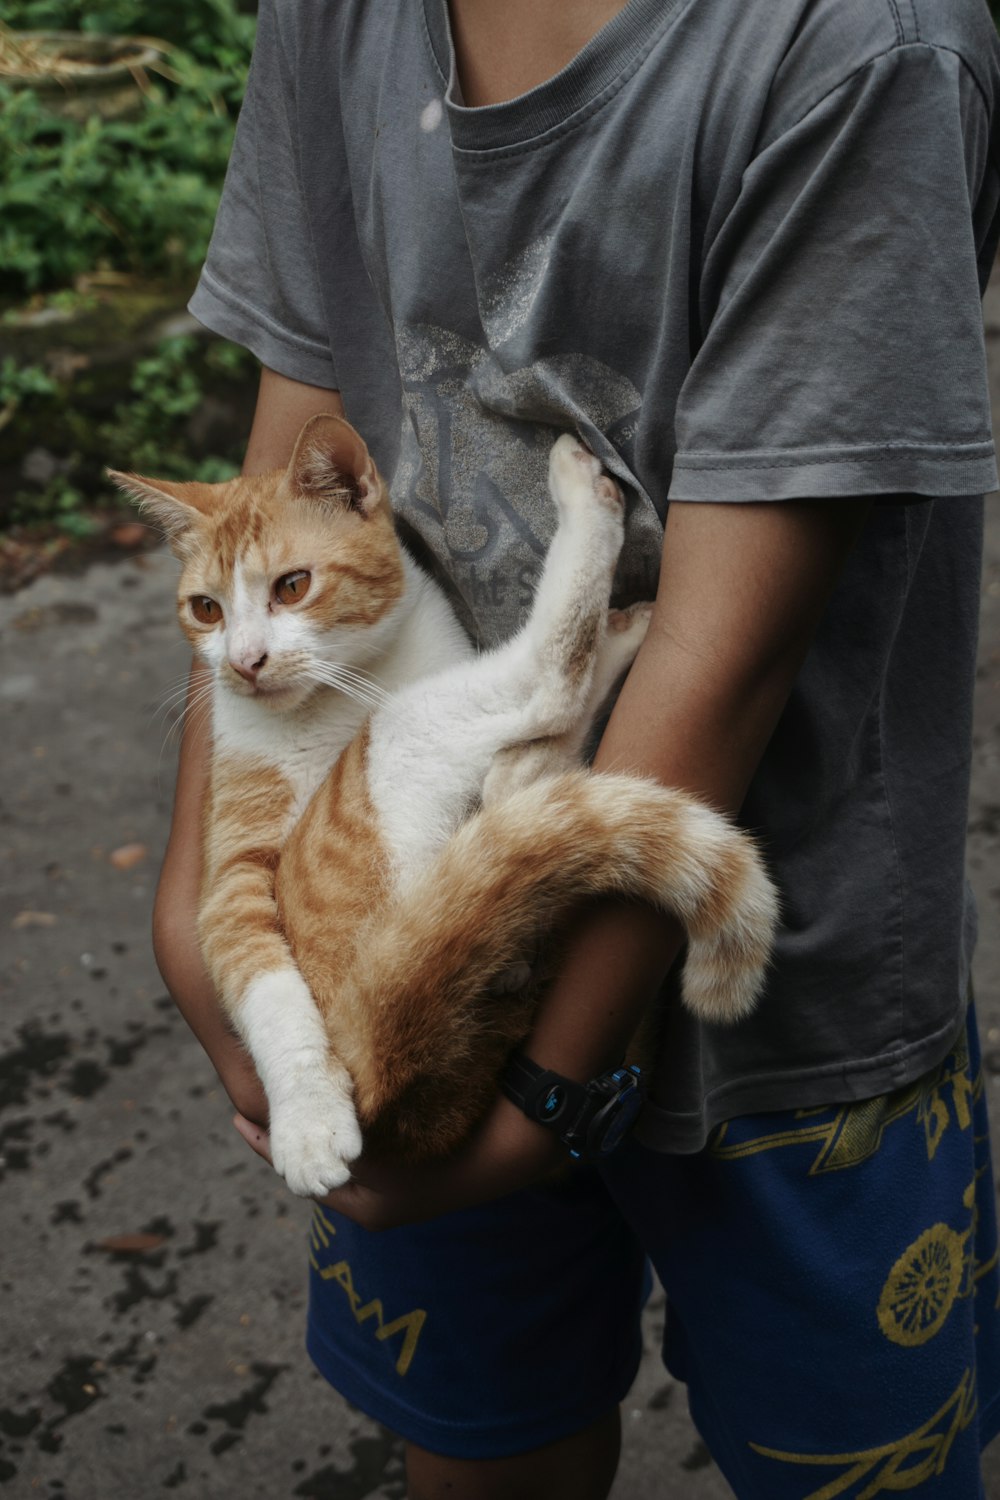 a young boy holding a cat in his hands